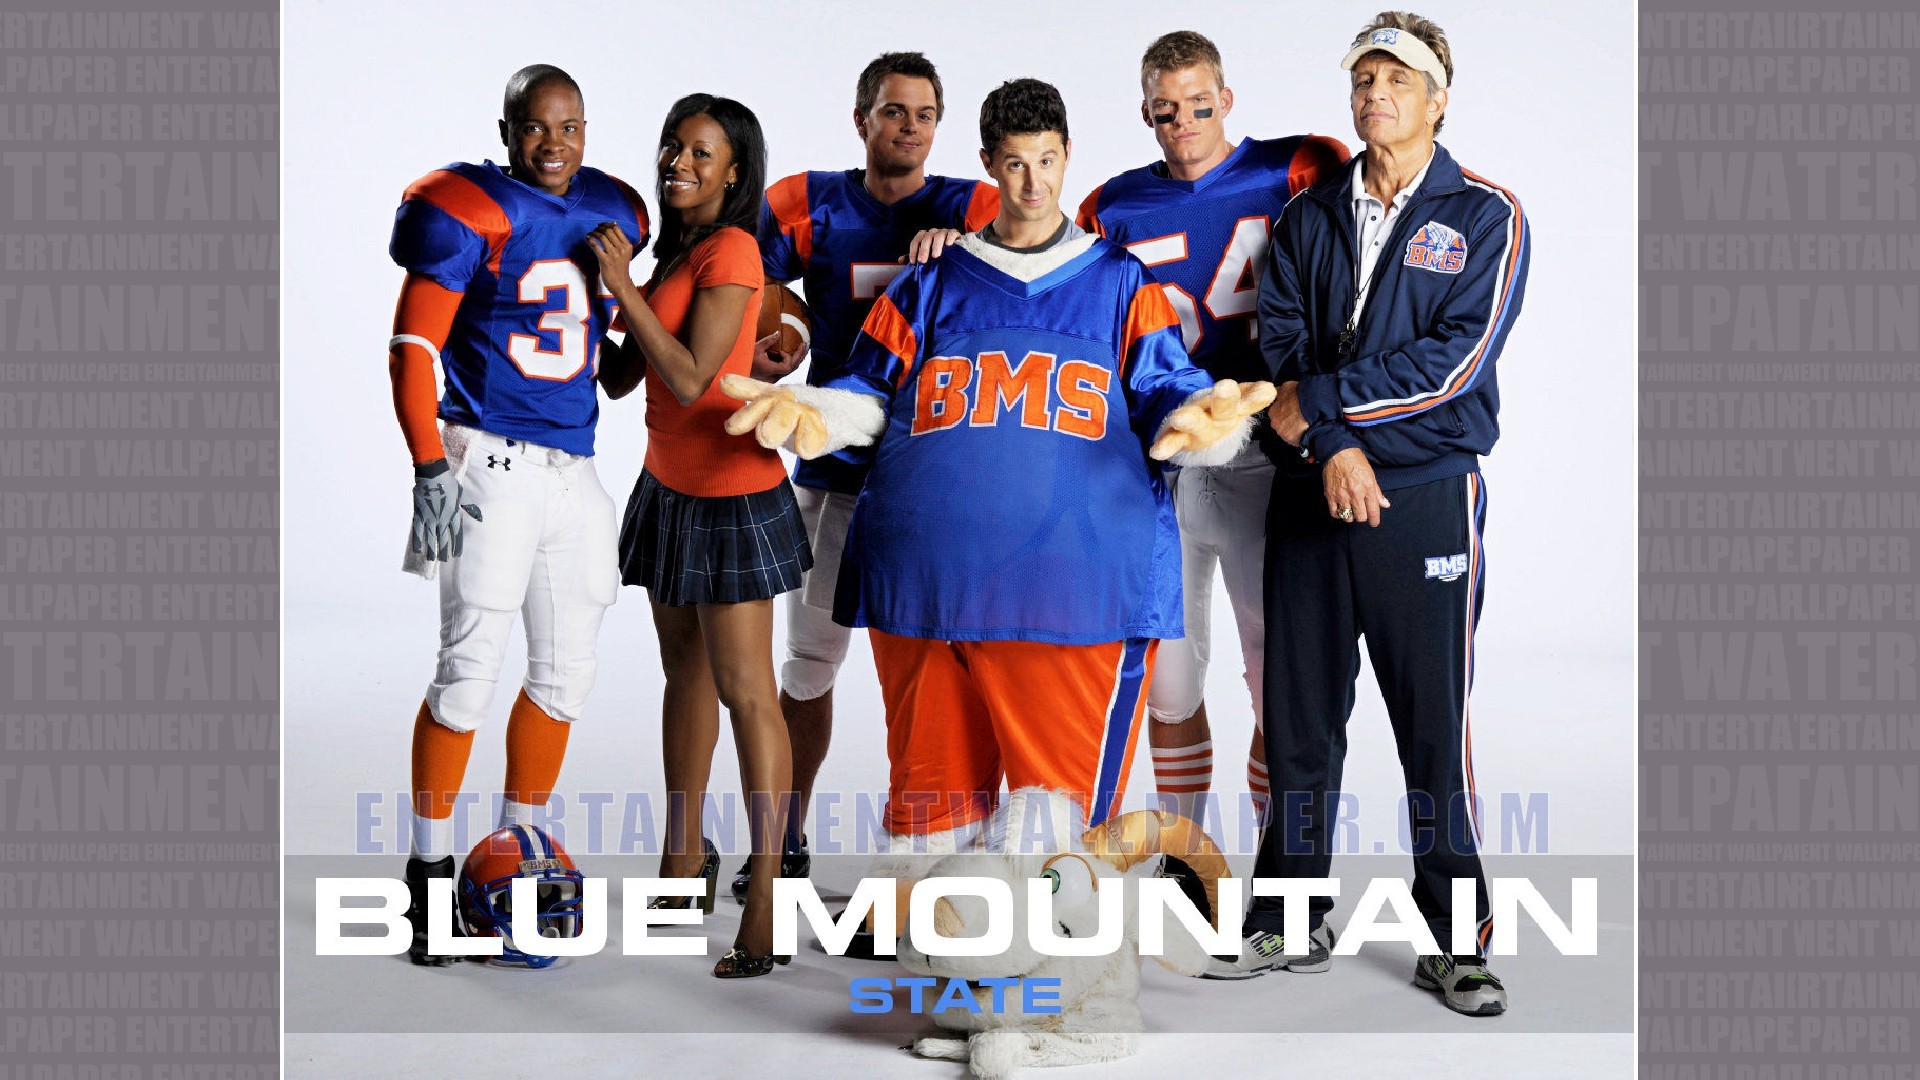 1920x1080 Blue Mountain State Wallpaper - Original size, download now.